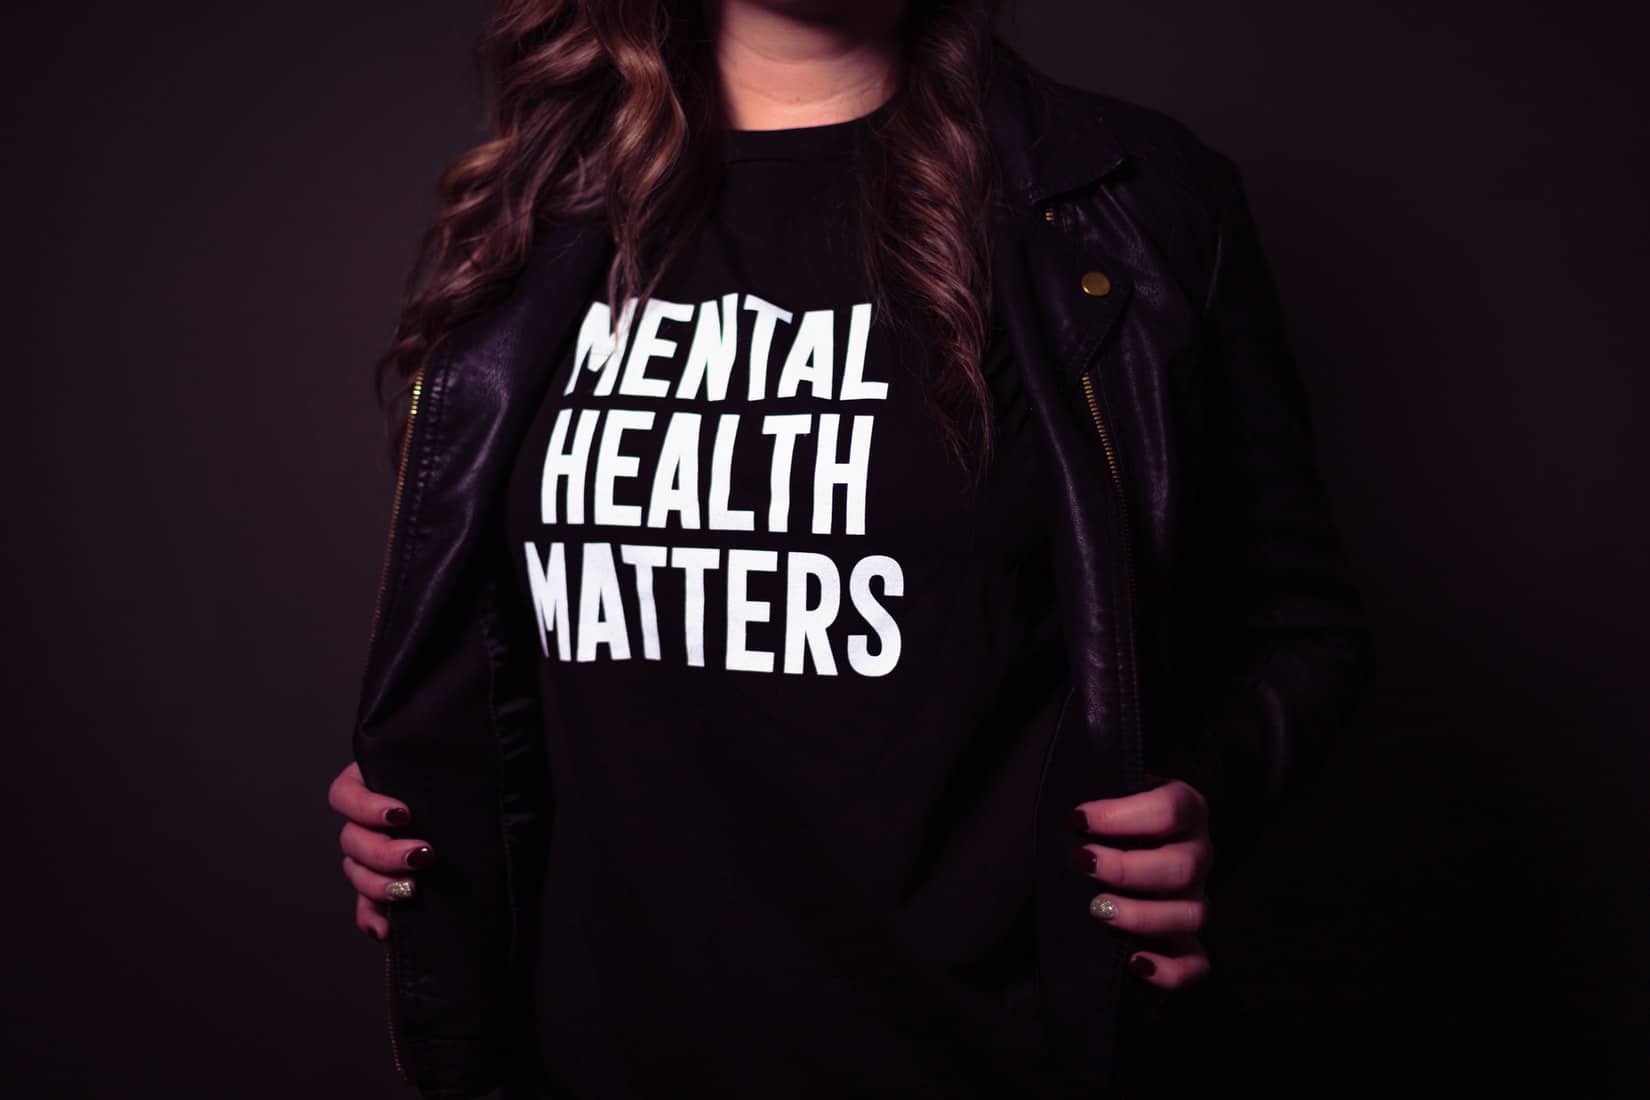 woman with mental health matters t-shirt by Matthew Ball